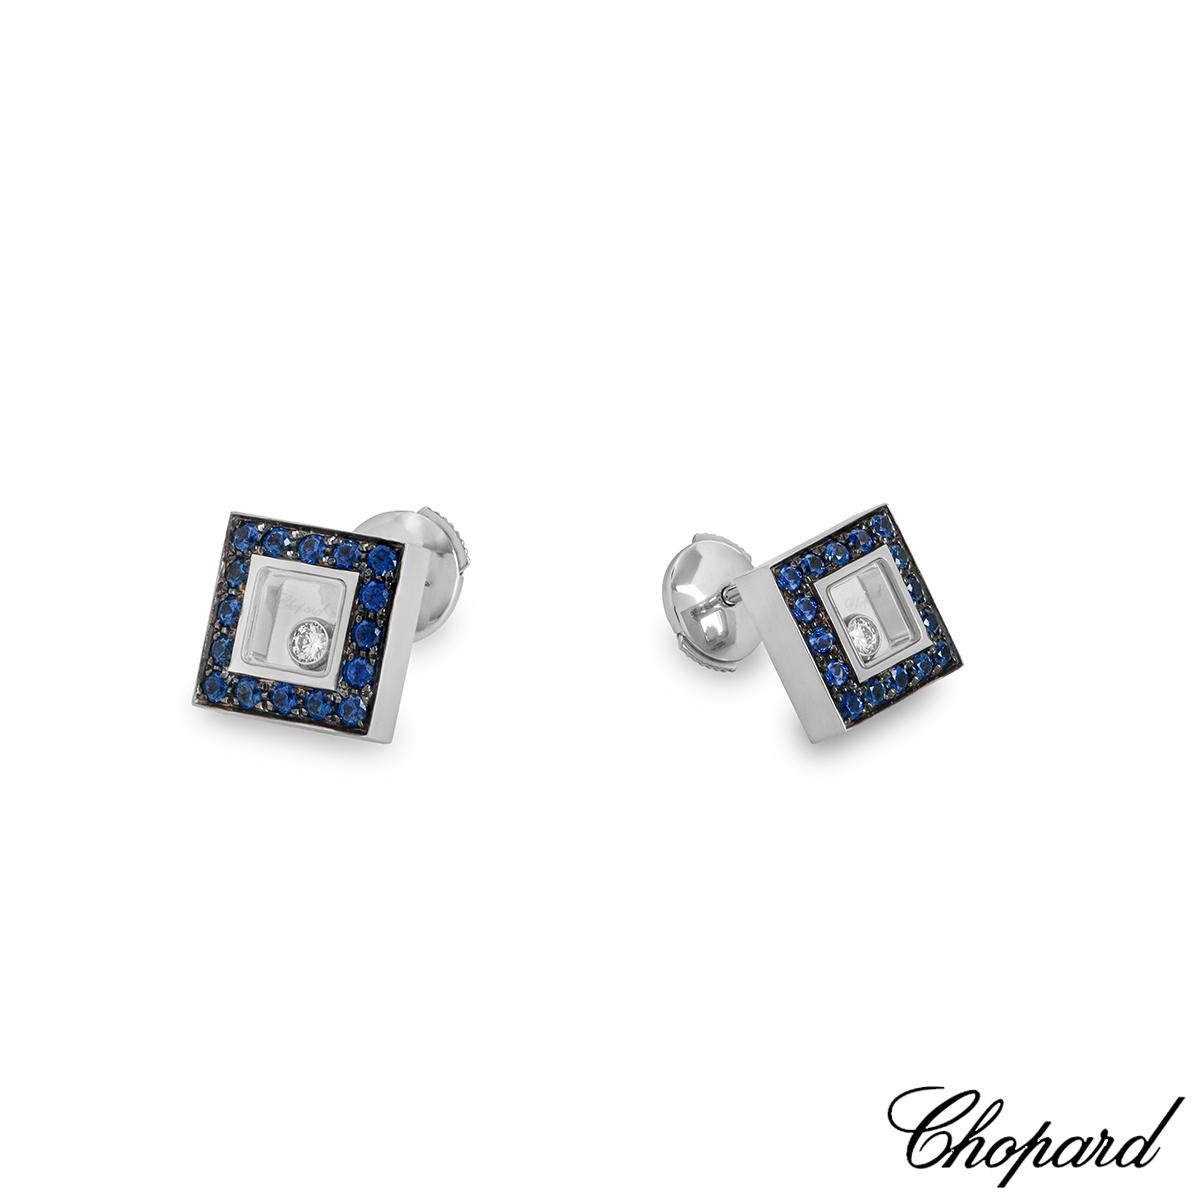 Round Cut Chopard White Gold Sapphire Happy Diamonds Earrings 83/2896-1008 For Sale